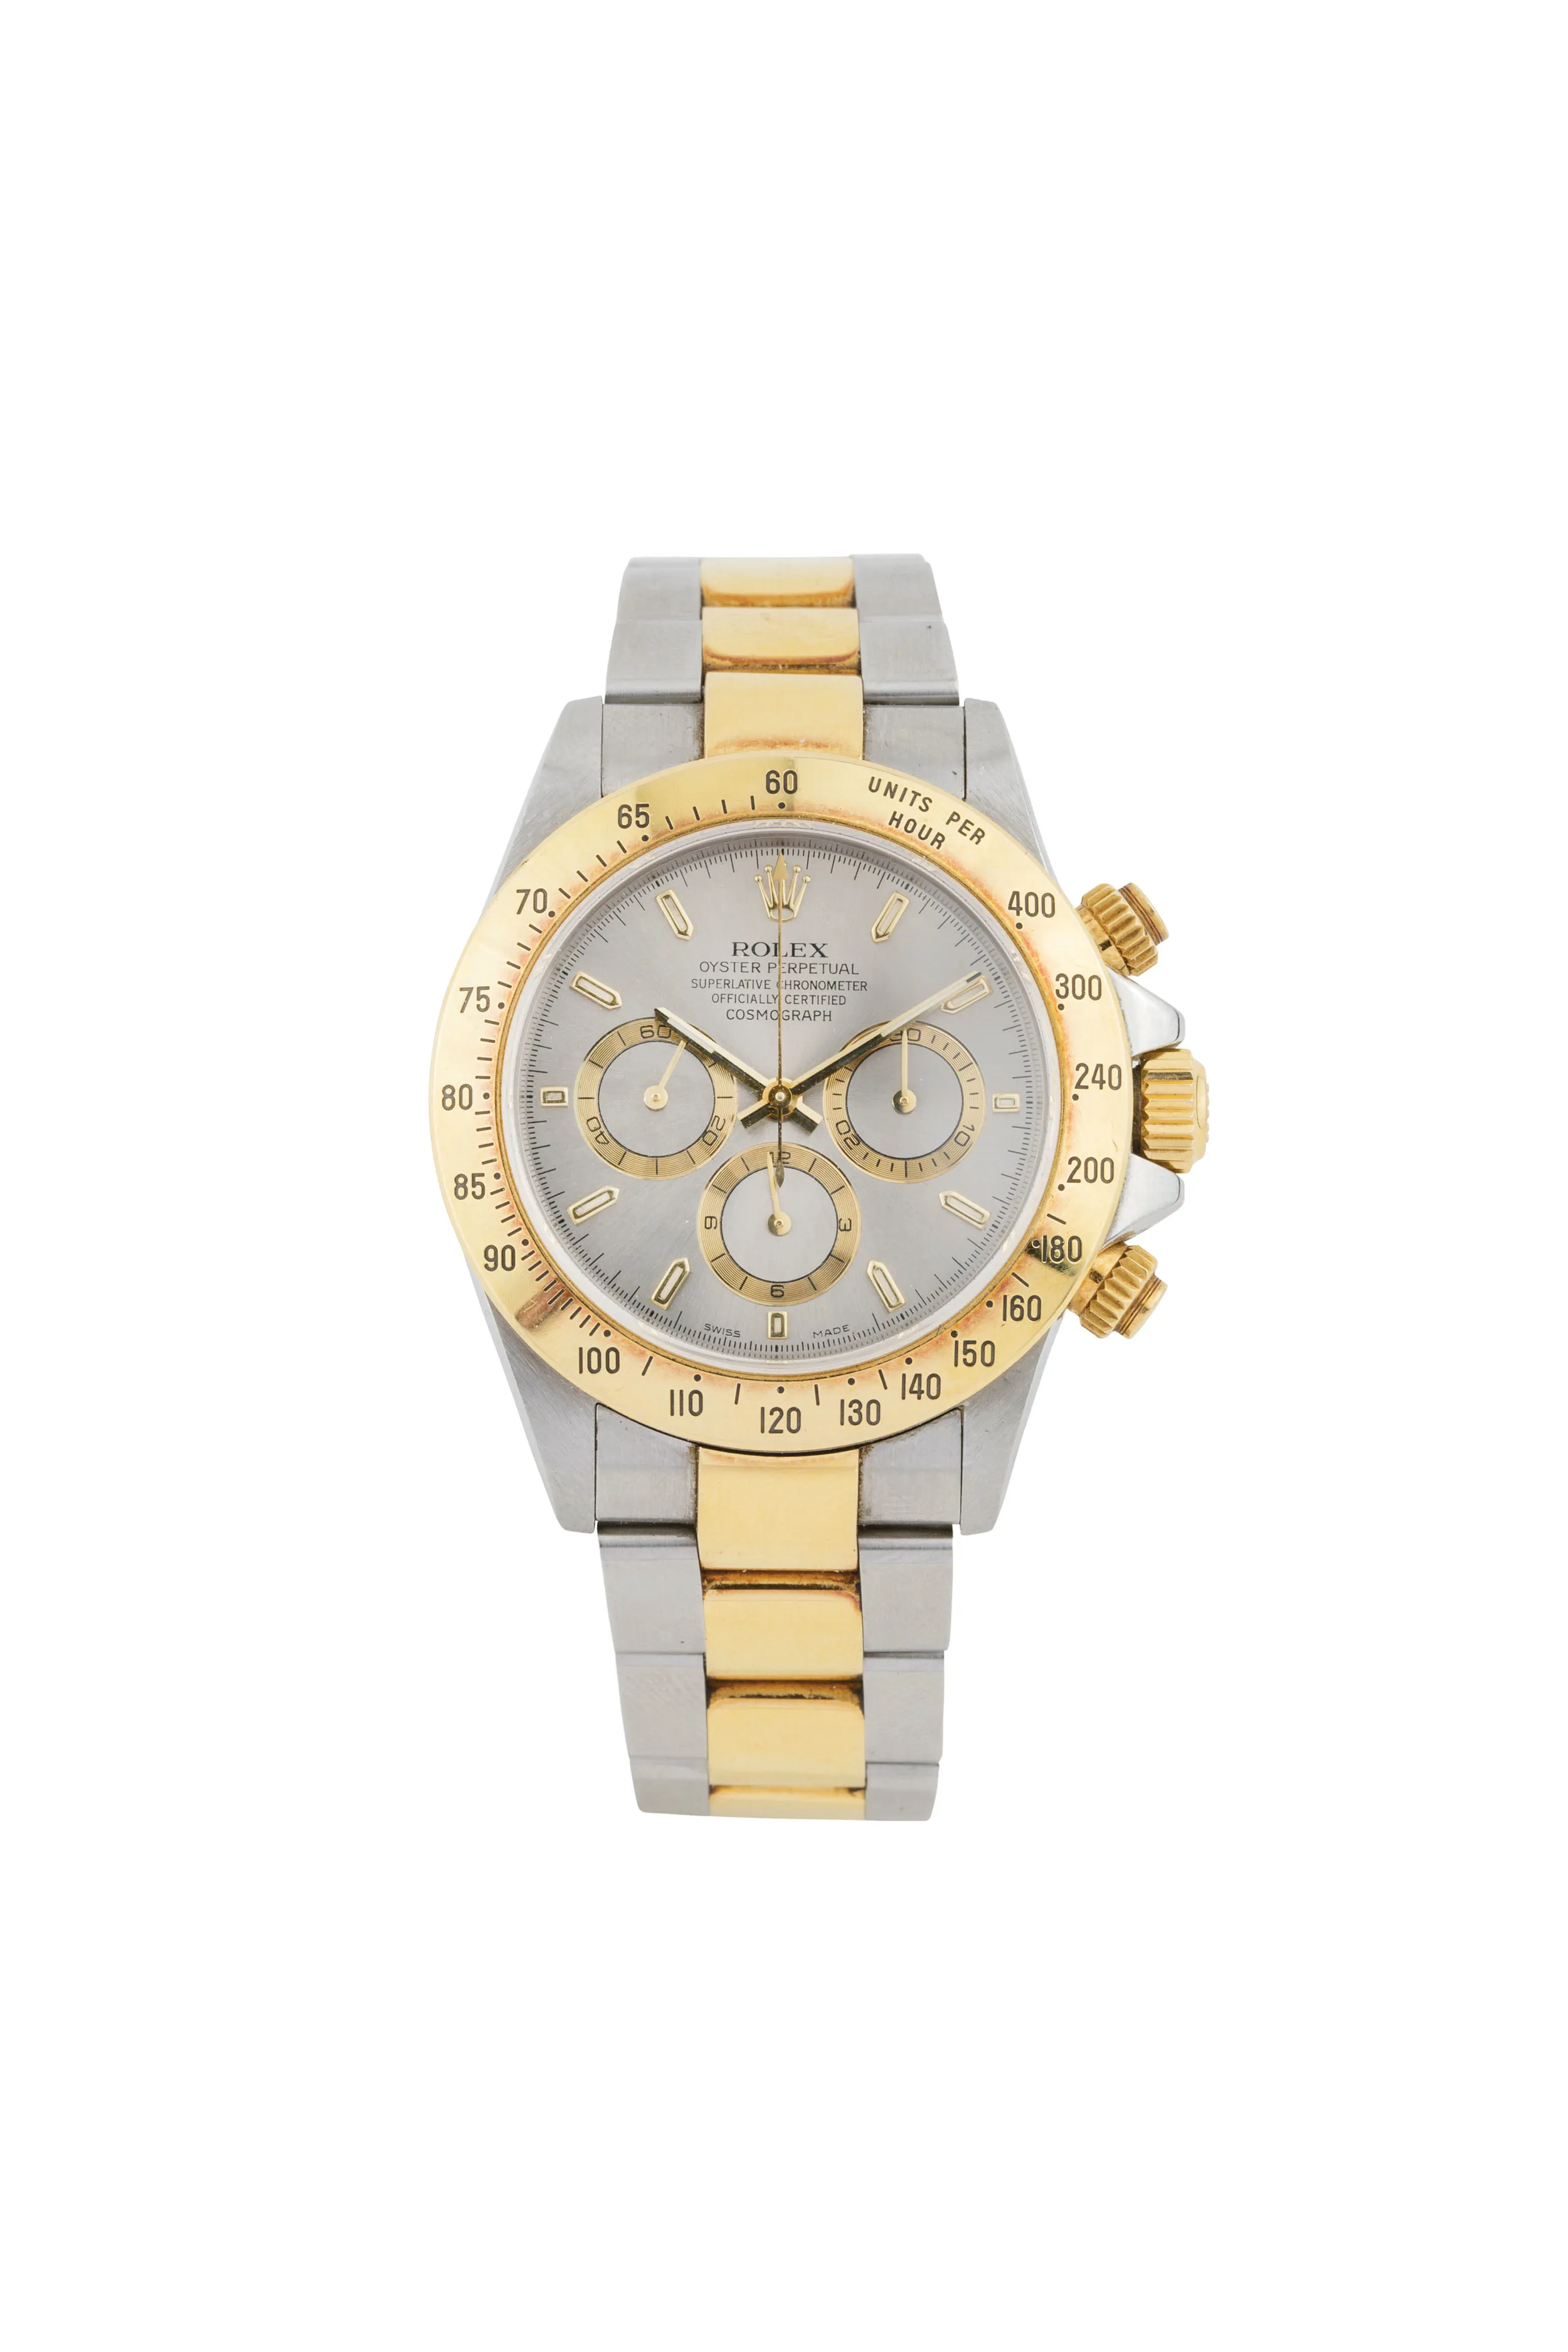 Rolex Daytona 16523 40mm Stainless steel and gold Gray